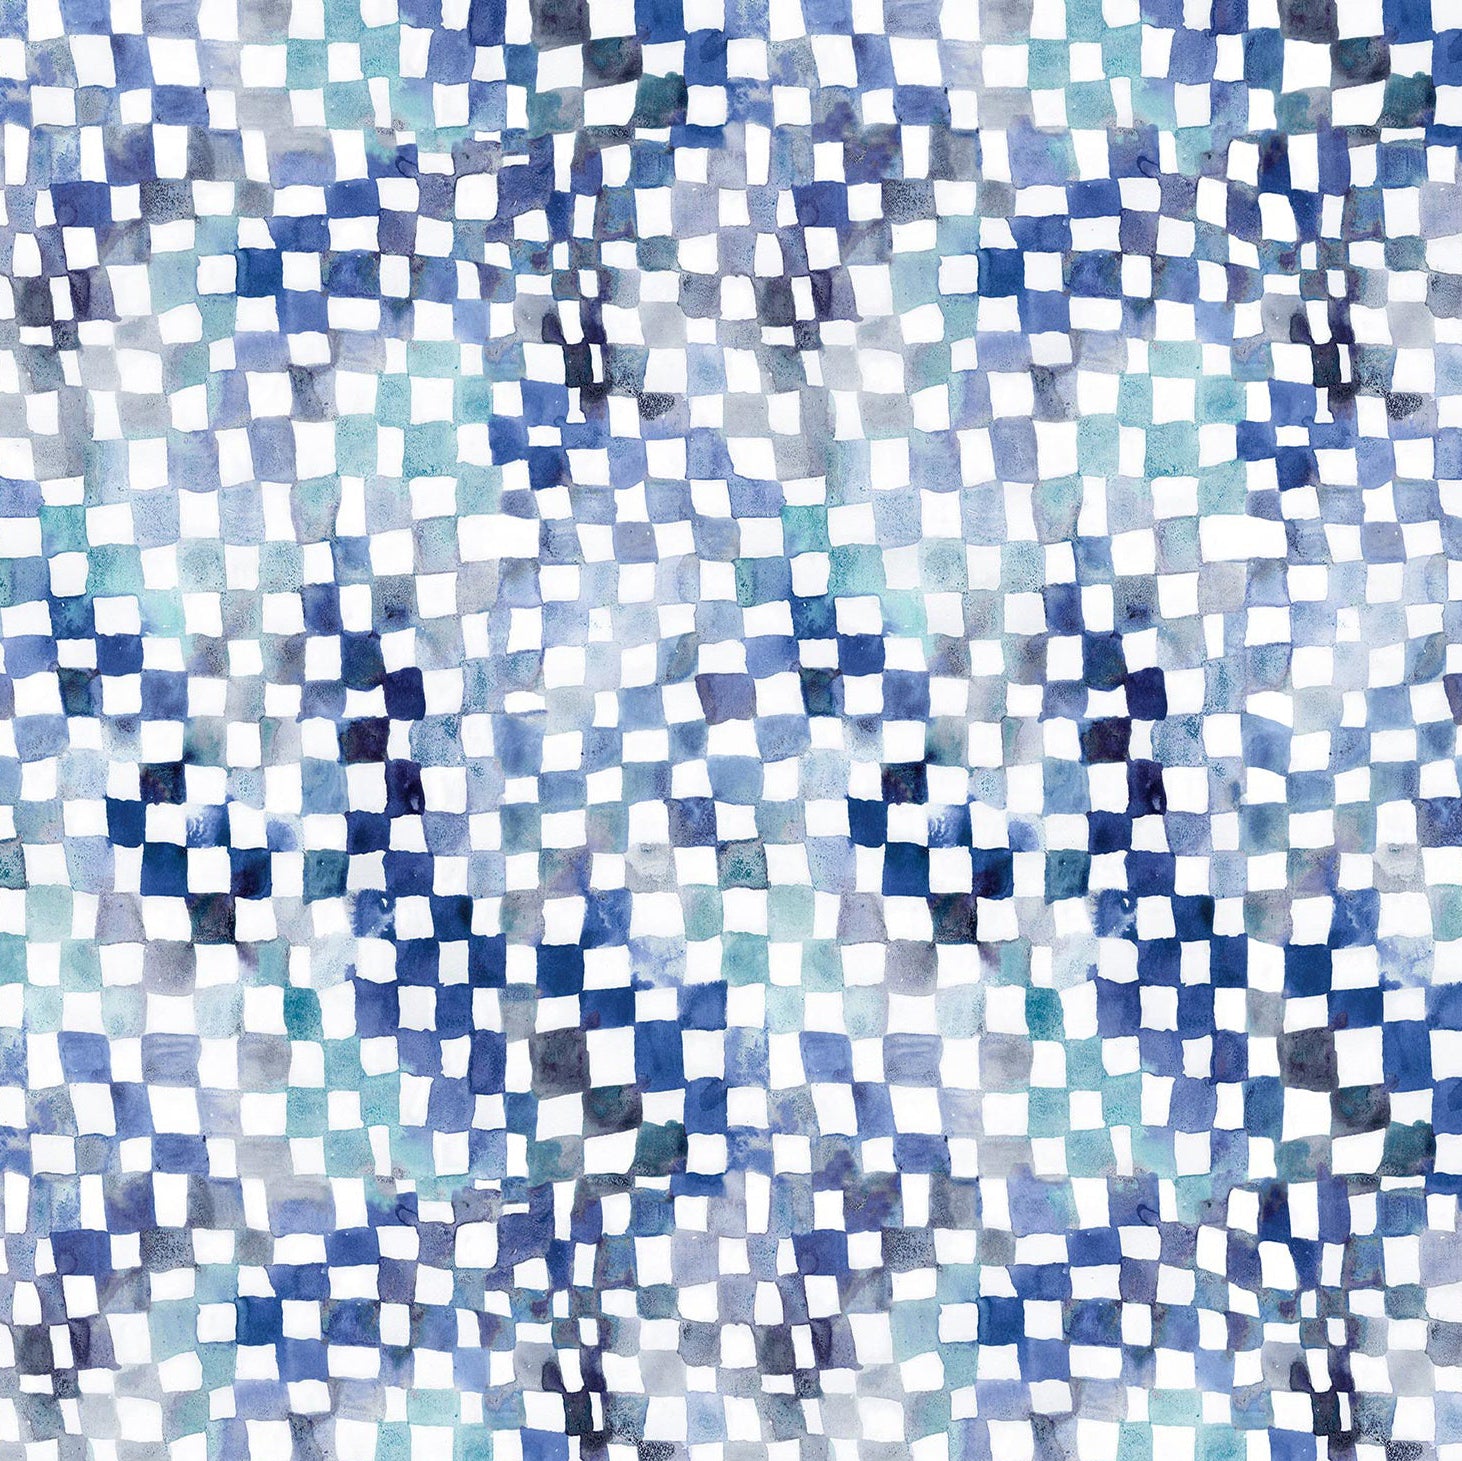 Detail of wallpaper in a painterly chess board print in shades of blue and navy on a white field.